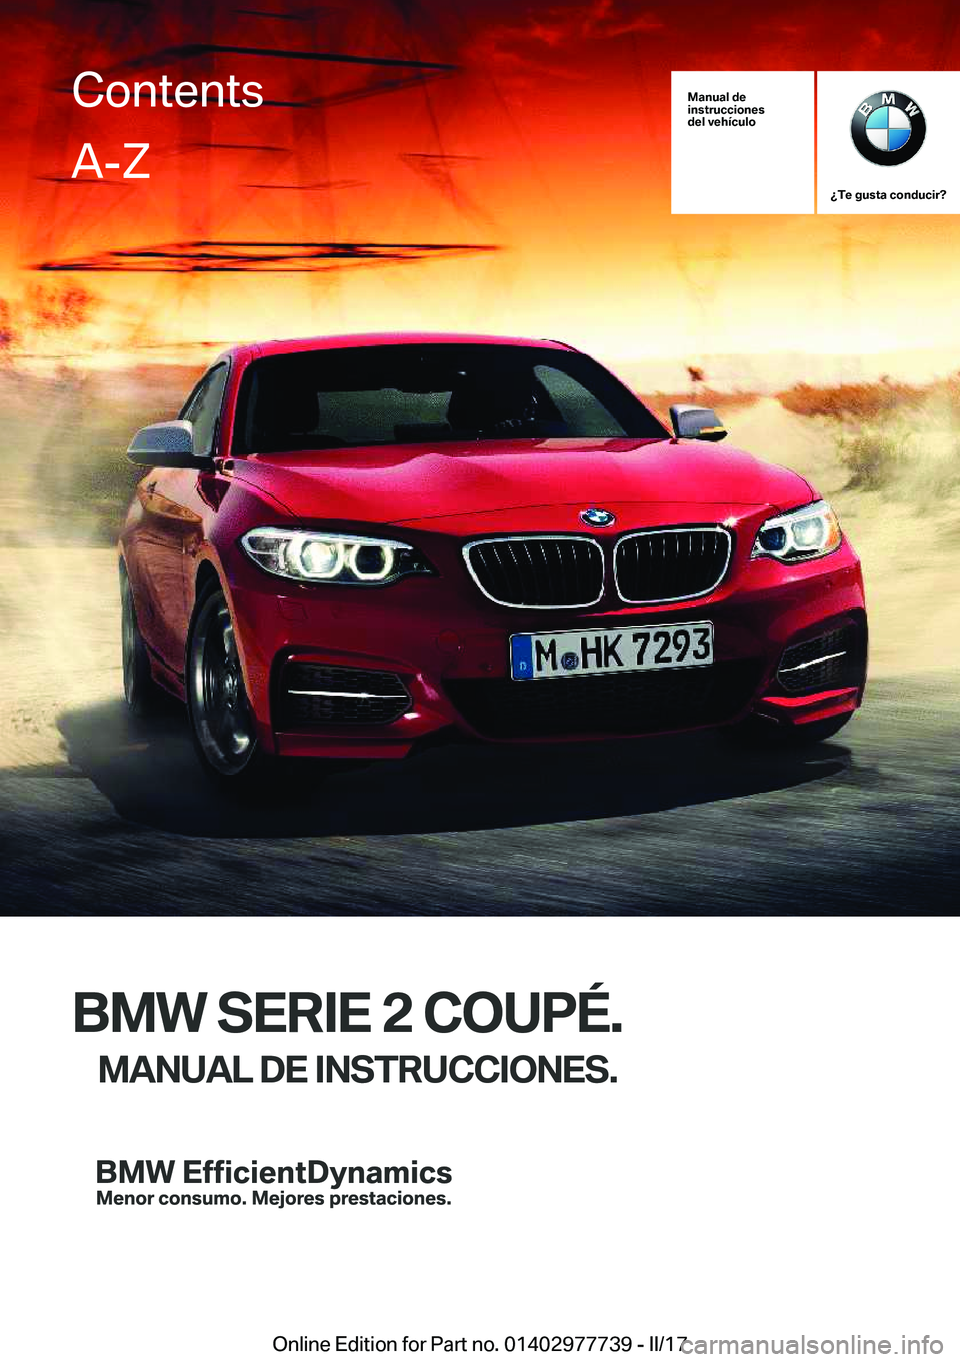 BMW 2 SERIES COUPE 2017  Manuales de Empleo (in Spanish) �M�a�n�u�a�l��d�e
�i�n�s�t�r�u�c�c�i�o�n�e�s
�d�e�l��v�e�h�